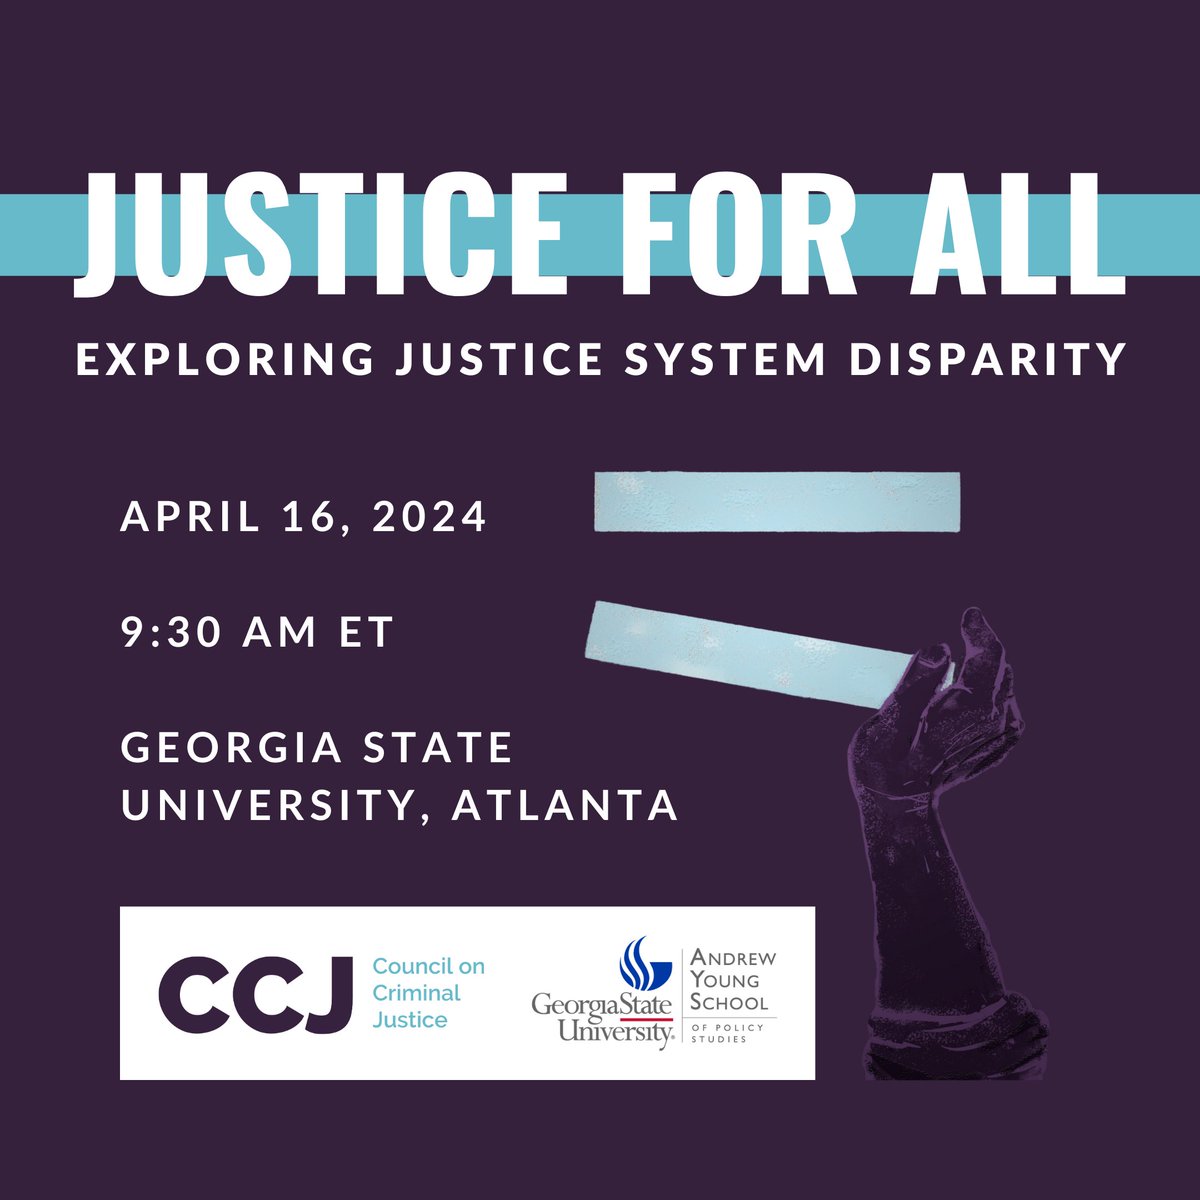 Join us for this upcoming event with the @CouncilonCJ, @aysps (Andrew Young School of Policy Studies) @GeorgiaStateU, & @gsucjc on April 16th for a look at the complex justice system disparities affecting our communities. RSVP now at: secure.counciloncj.org/nx/portal/neon…